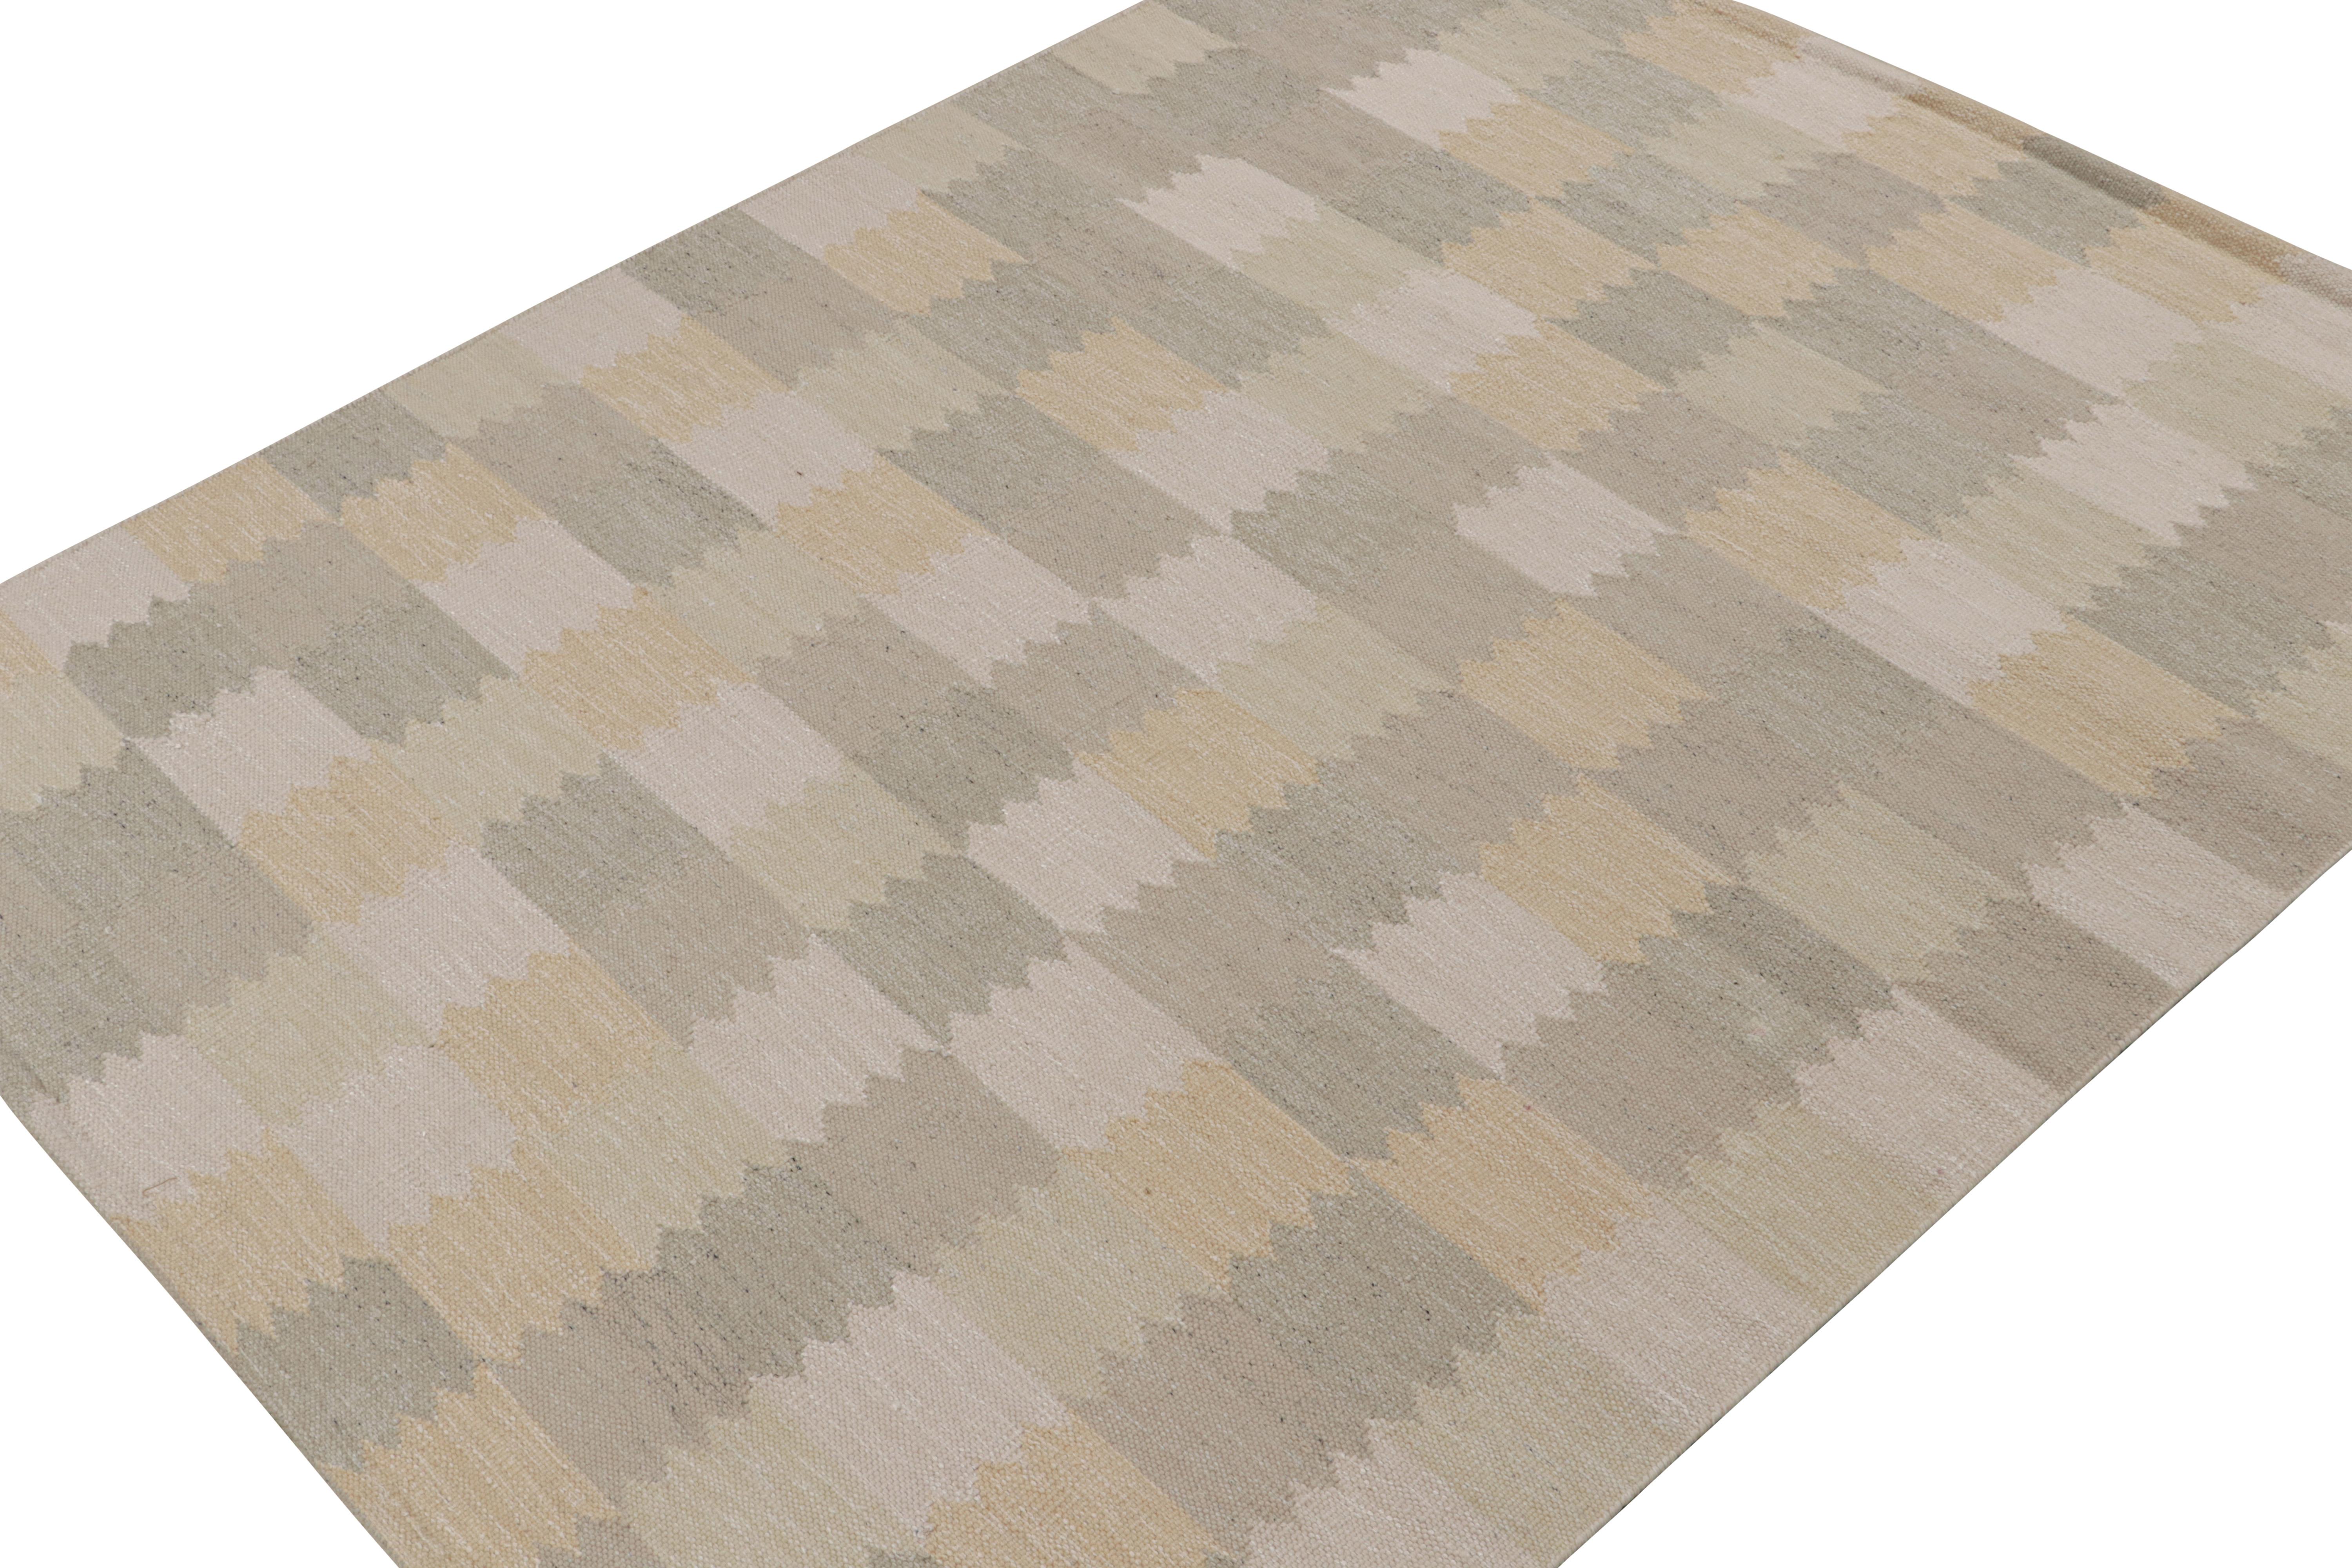 This custom rug design represents Swedish style flatweaves from the Scandinavian Kilim Collection by Rug & Kilim. 

On the Design: 

These photos represent a former 8x10 rug in this style, handwoven in wool and undyed natural yarns in the Rollakan